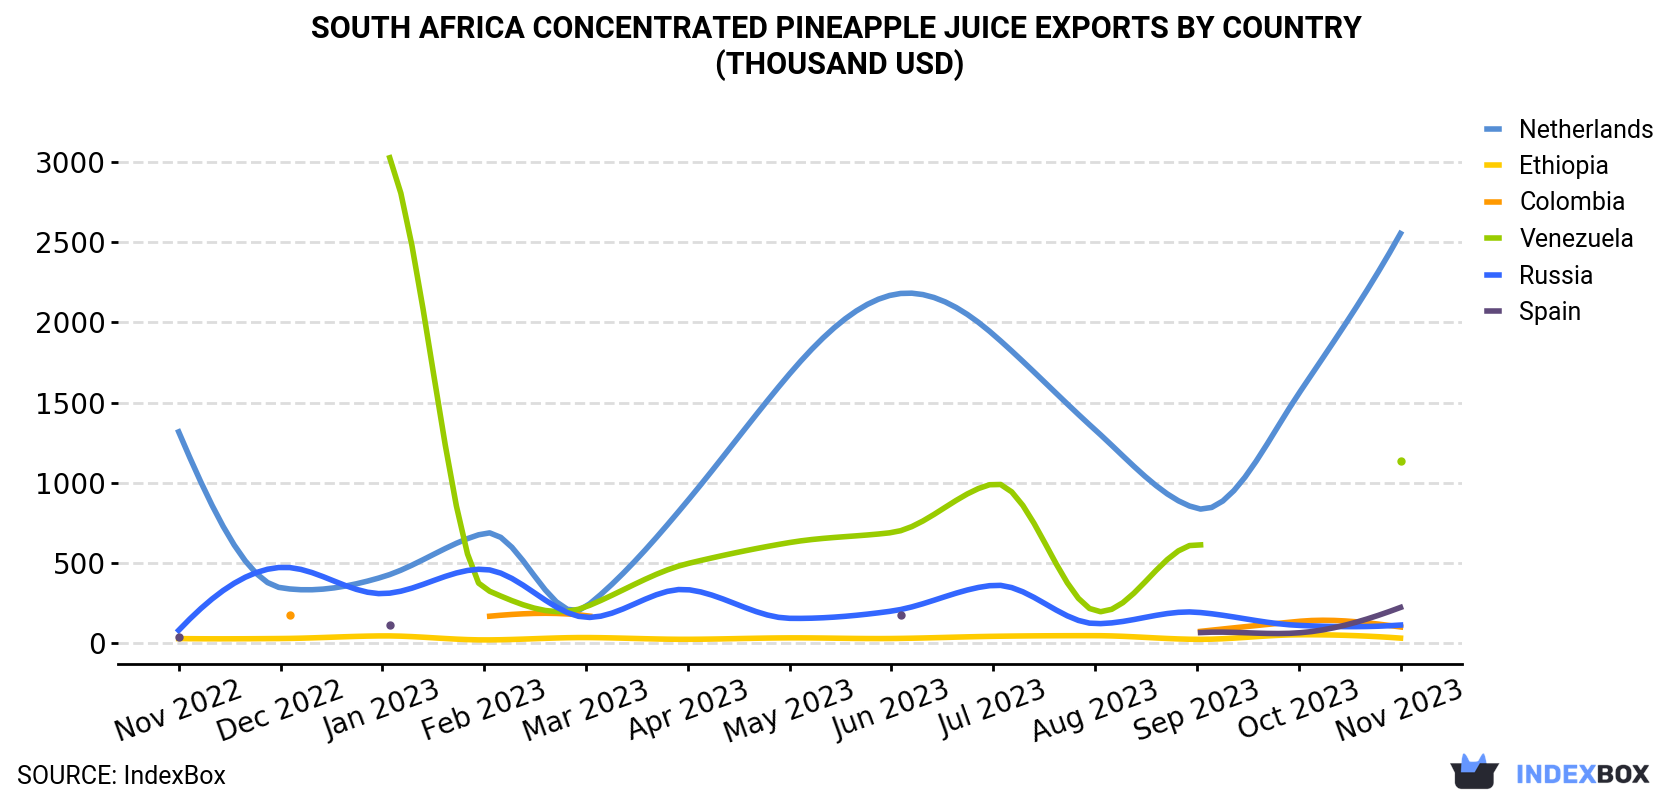 South Africa Concentrated Pineapple Juice Exports By Country (Thousand USD)